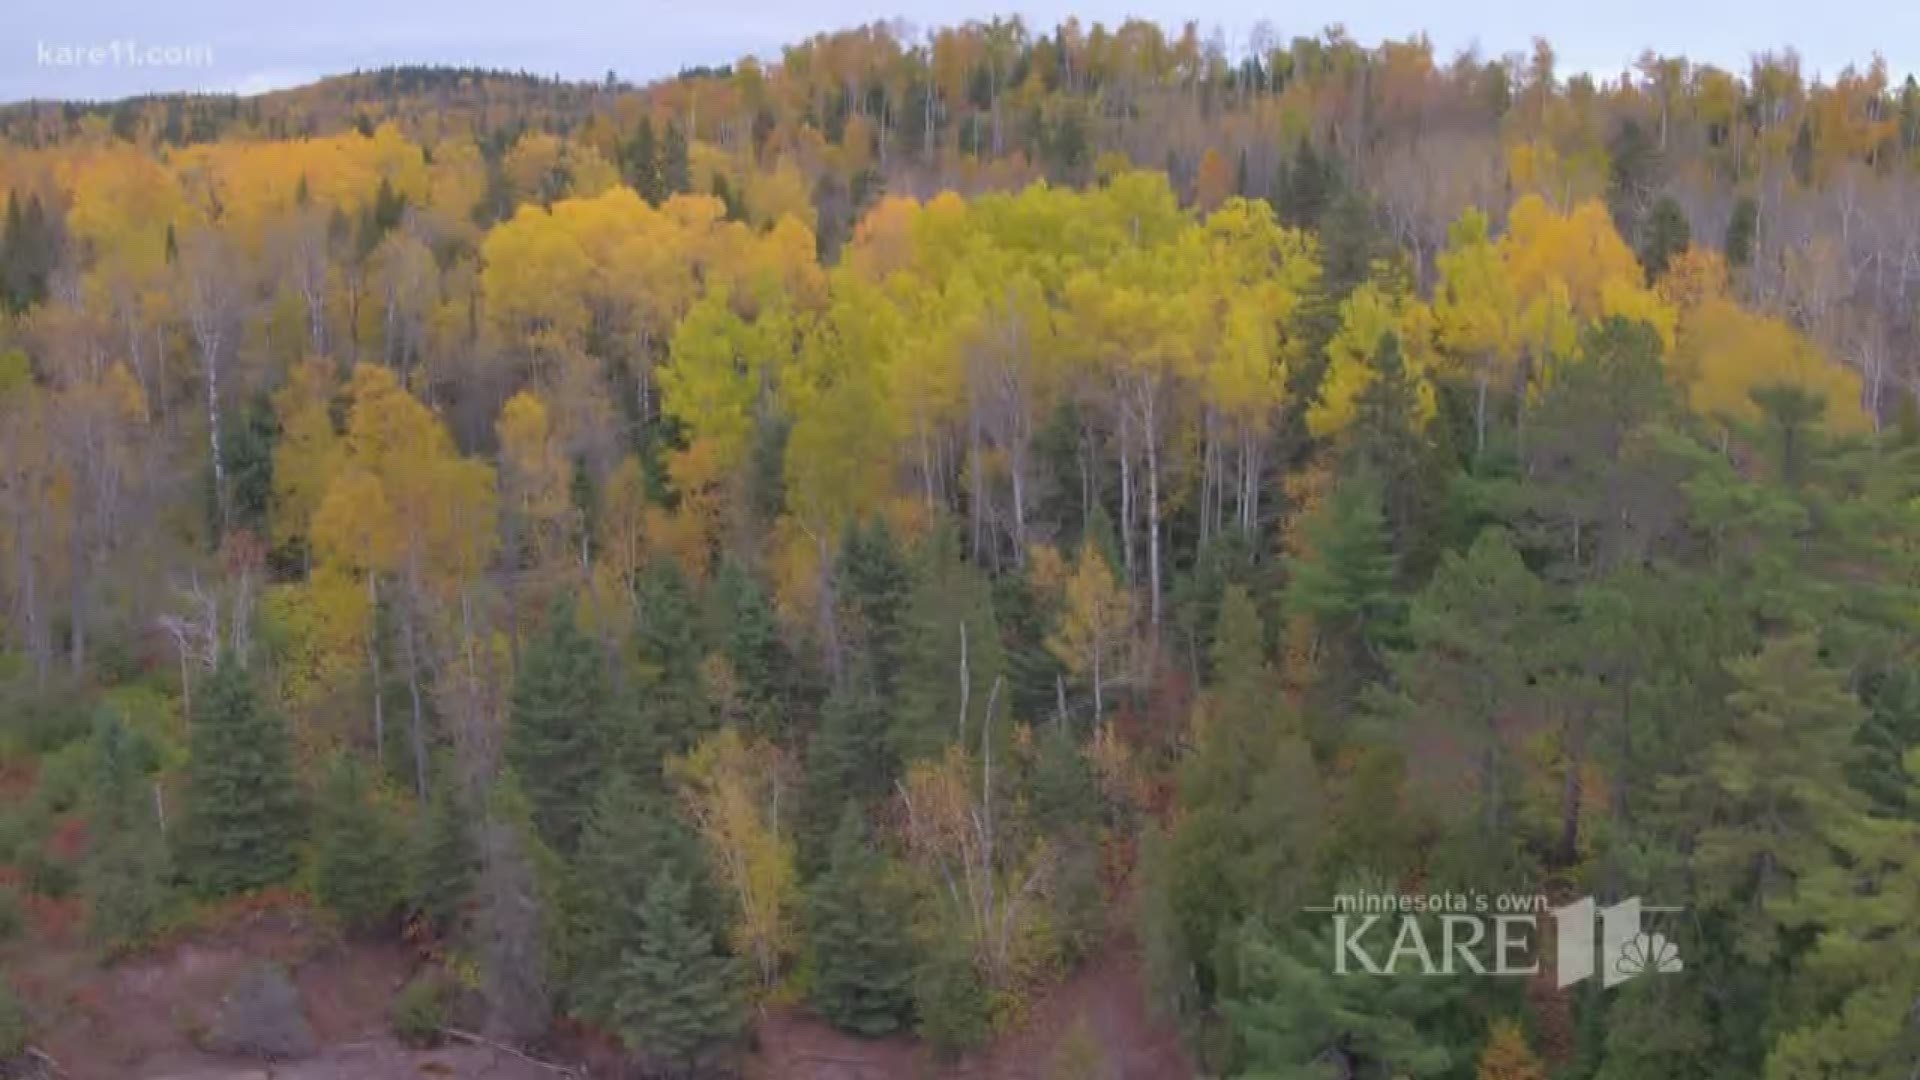 According to state park officials, some folks have been ruining the party by trying to get a peek from above, and the DNR would like them to stop. http://kare11.tv/2ywilgJ